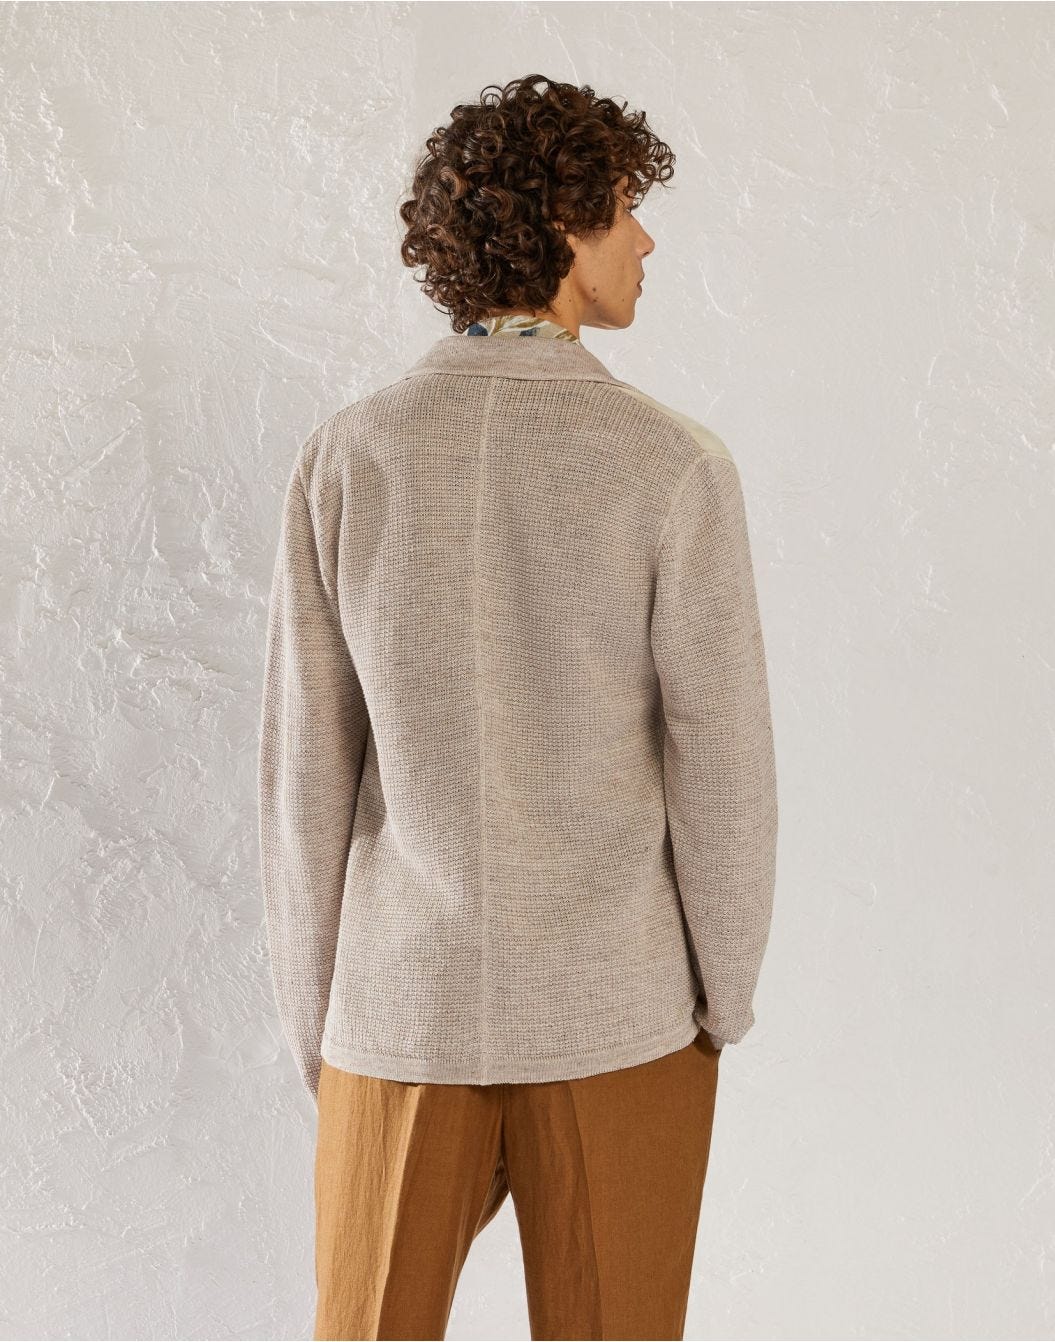 Linen knit jacket with suede details